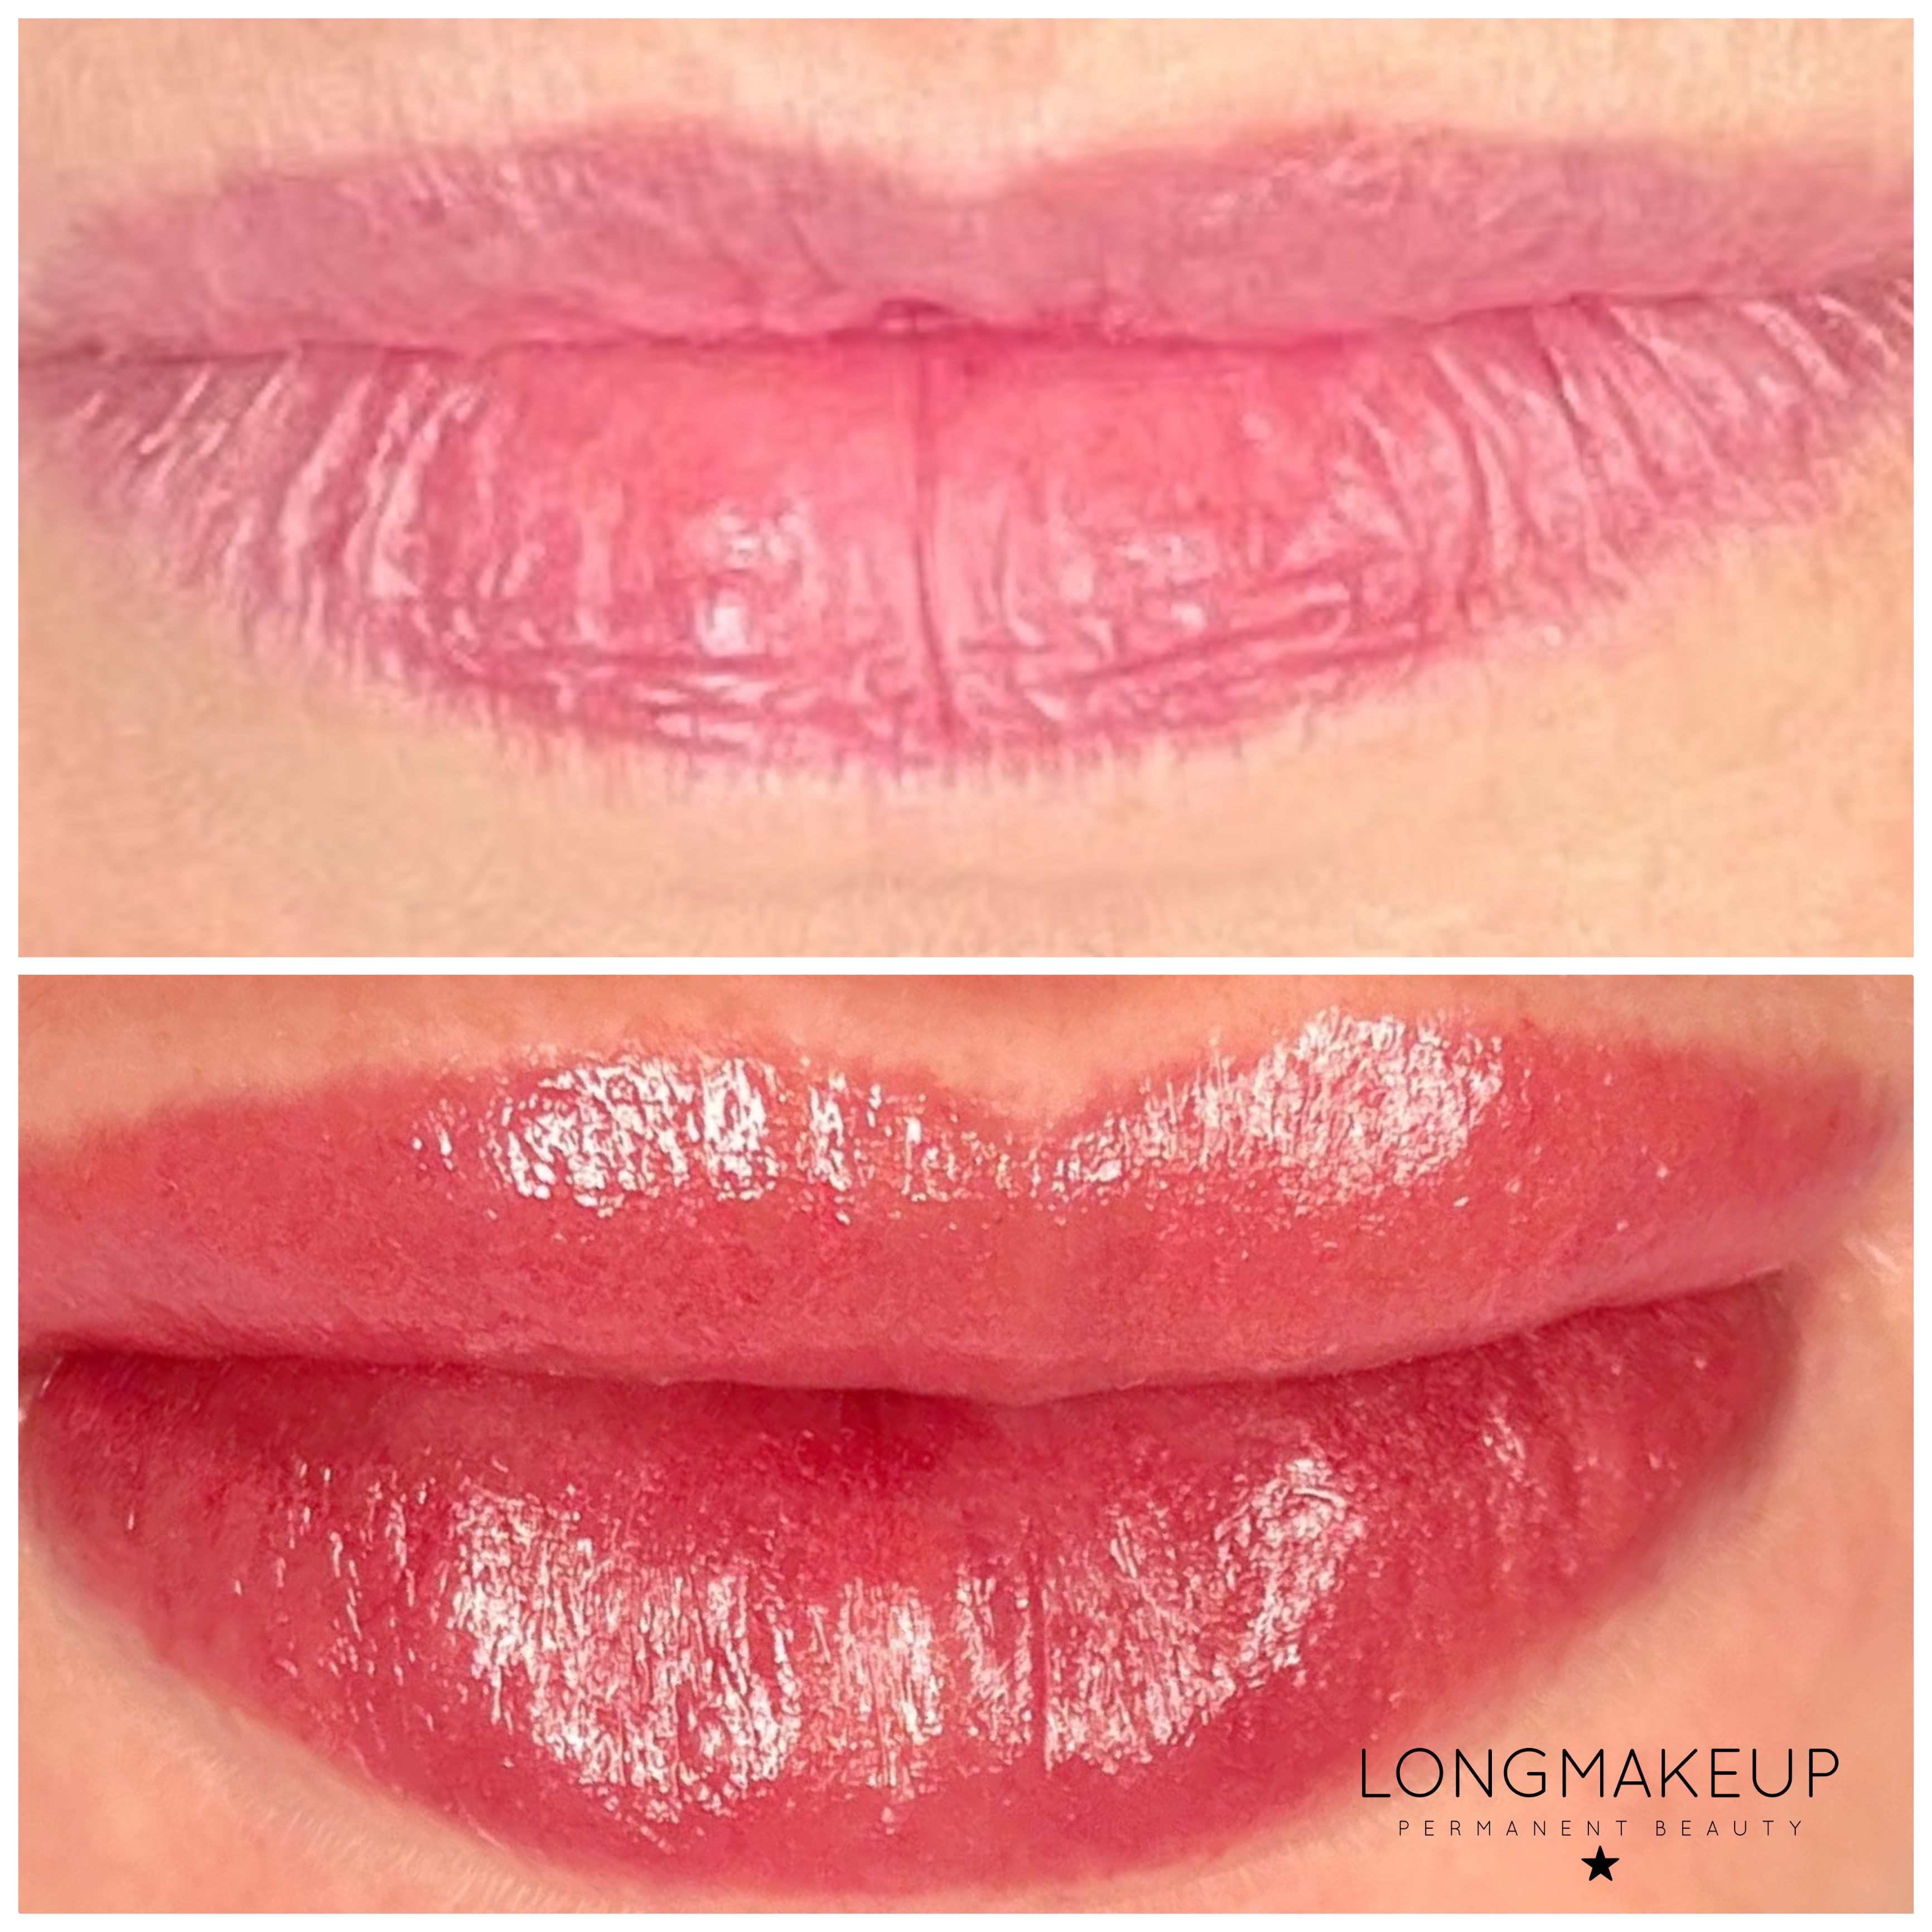 Before and after lip blush